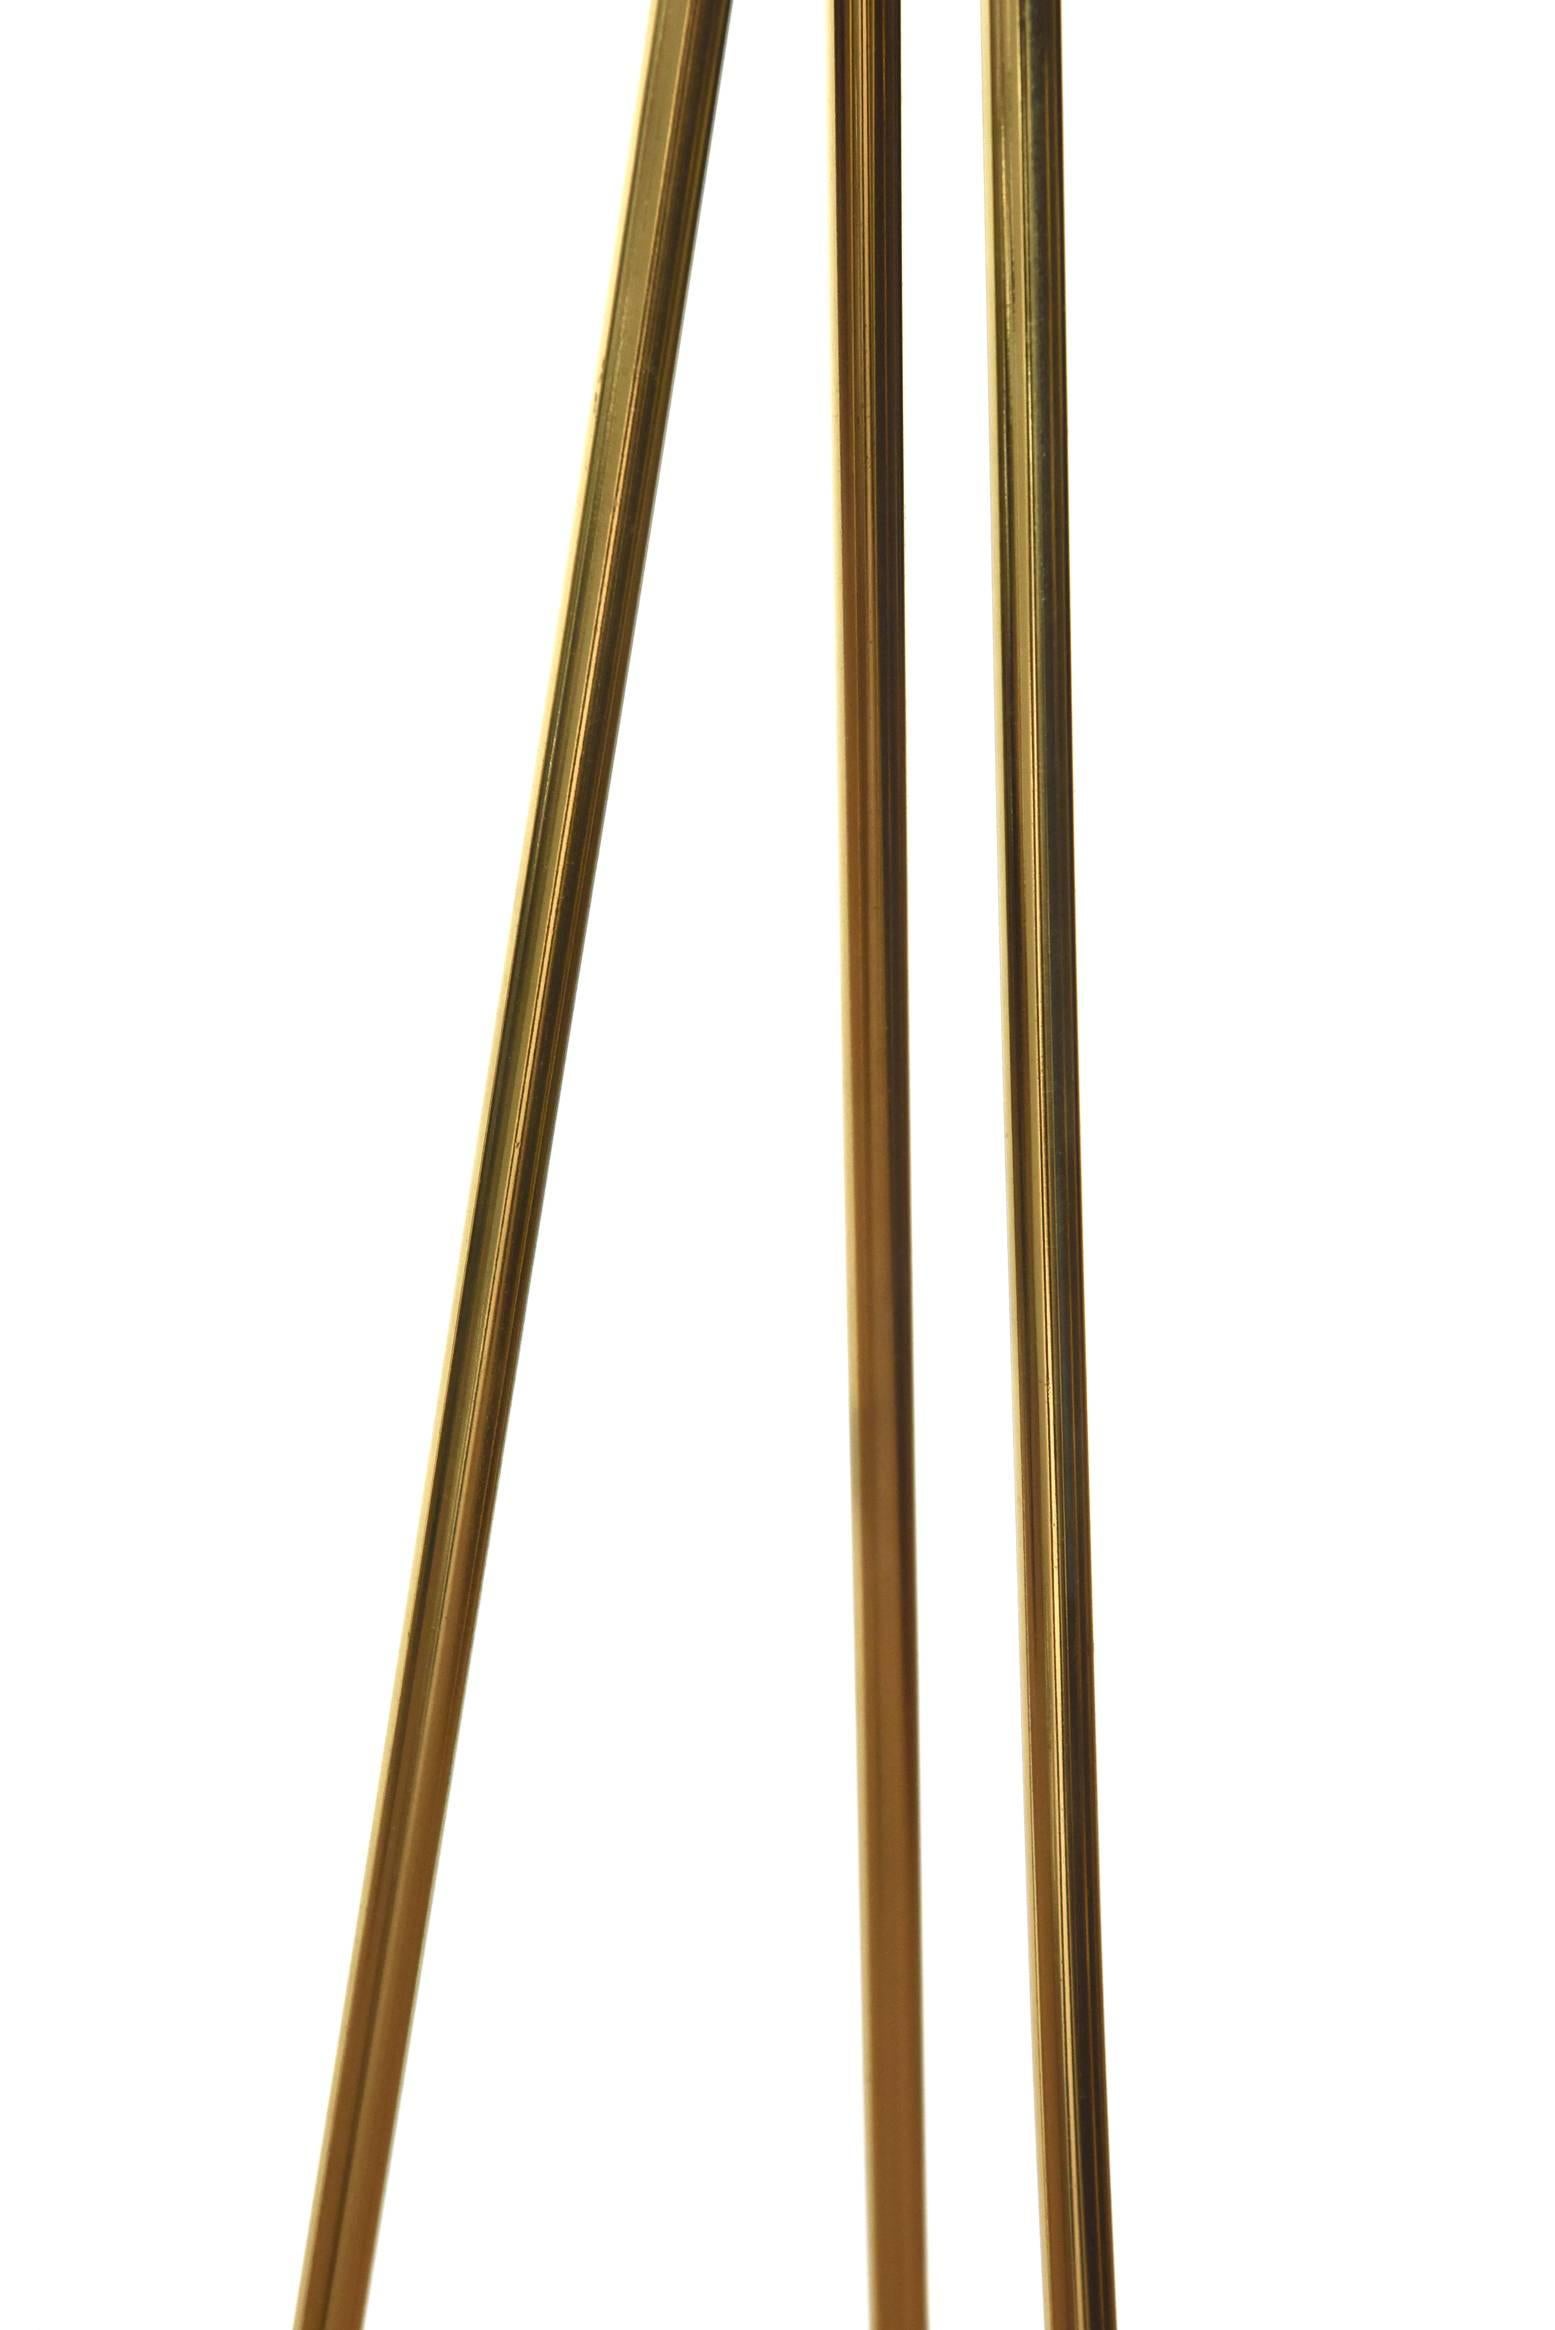 Brass and Gun Metal Restored Floor Lamp Style of Parzinger Mid-Century Modern For Sale 3